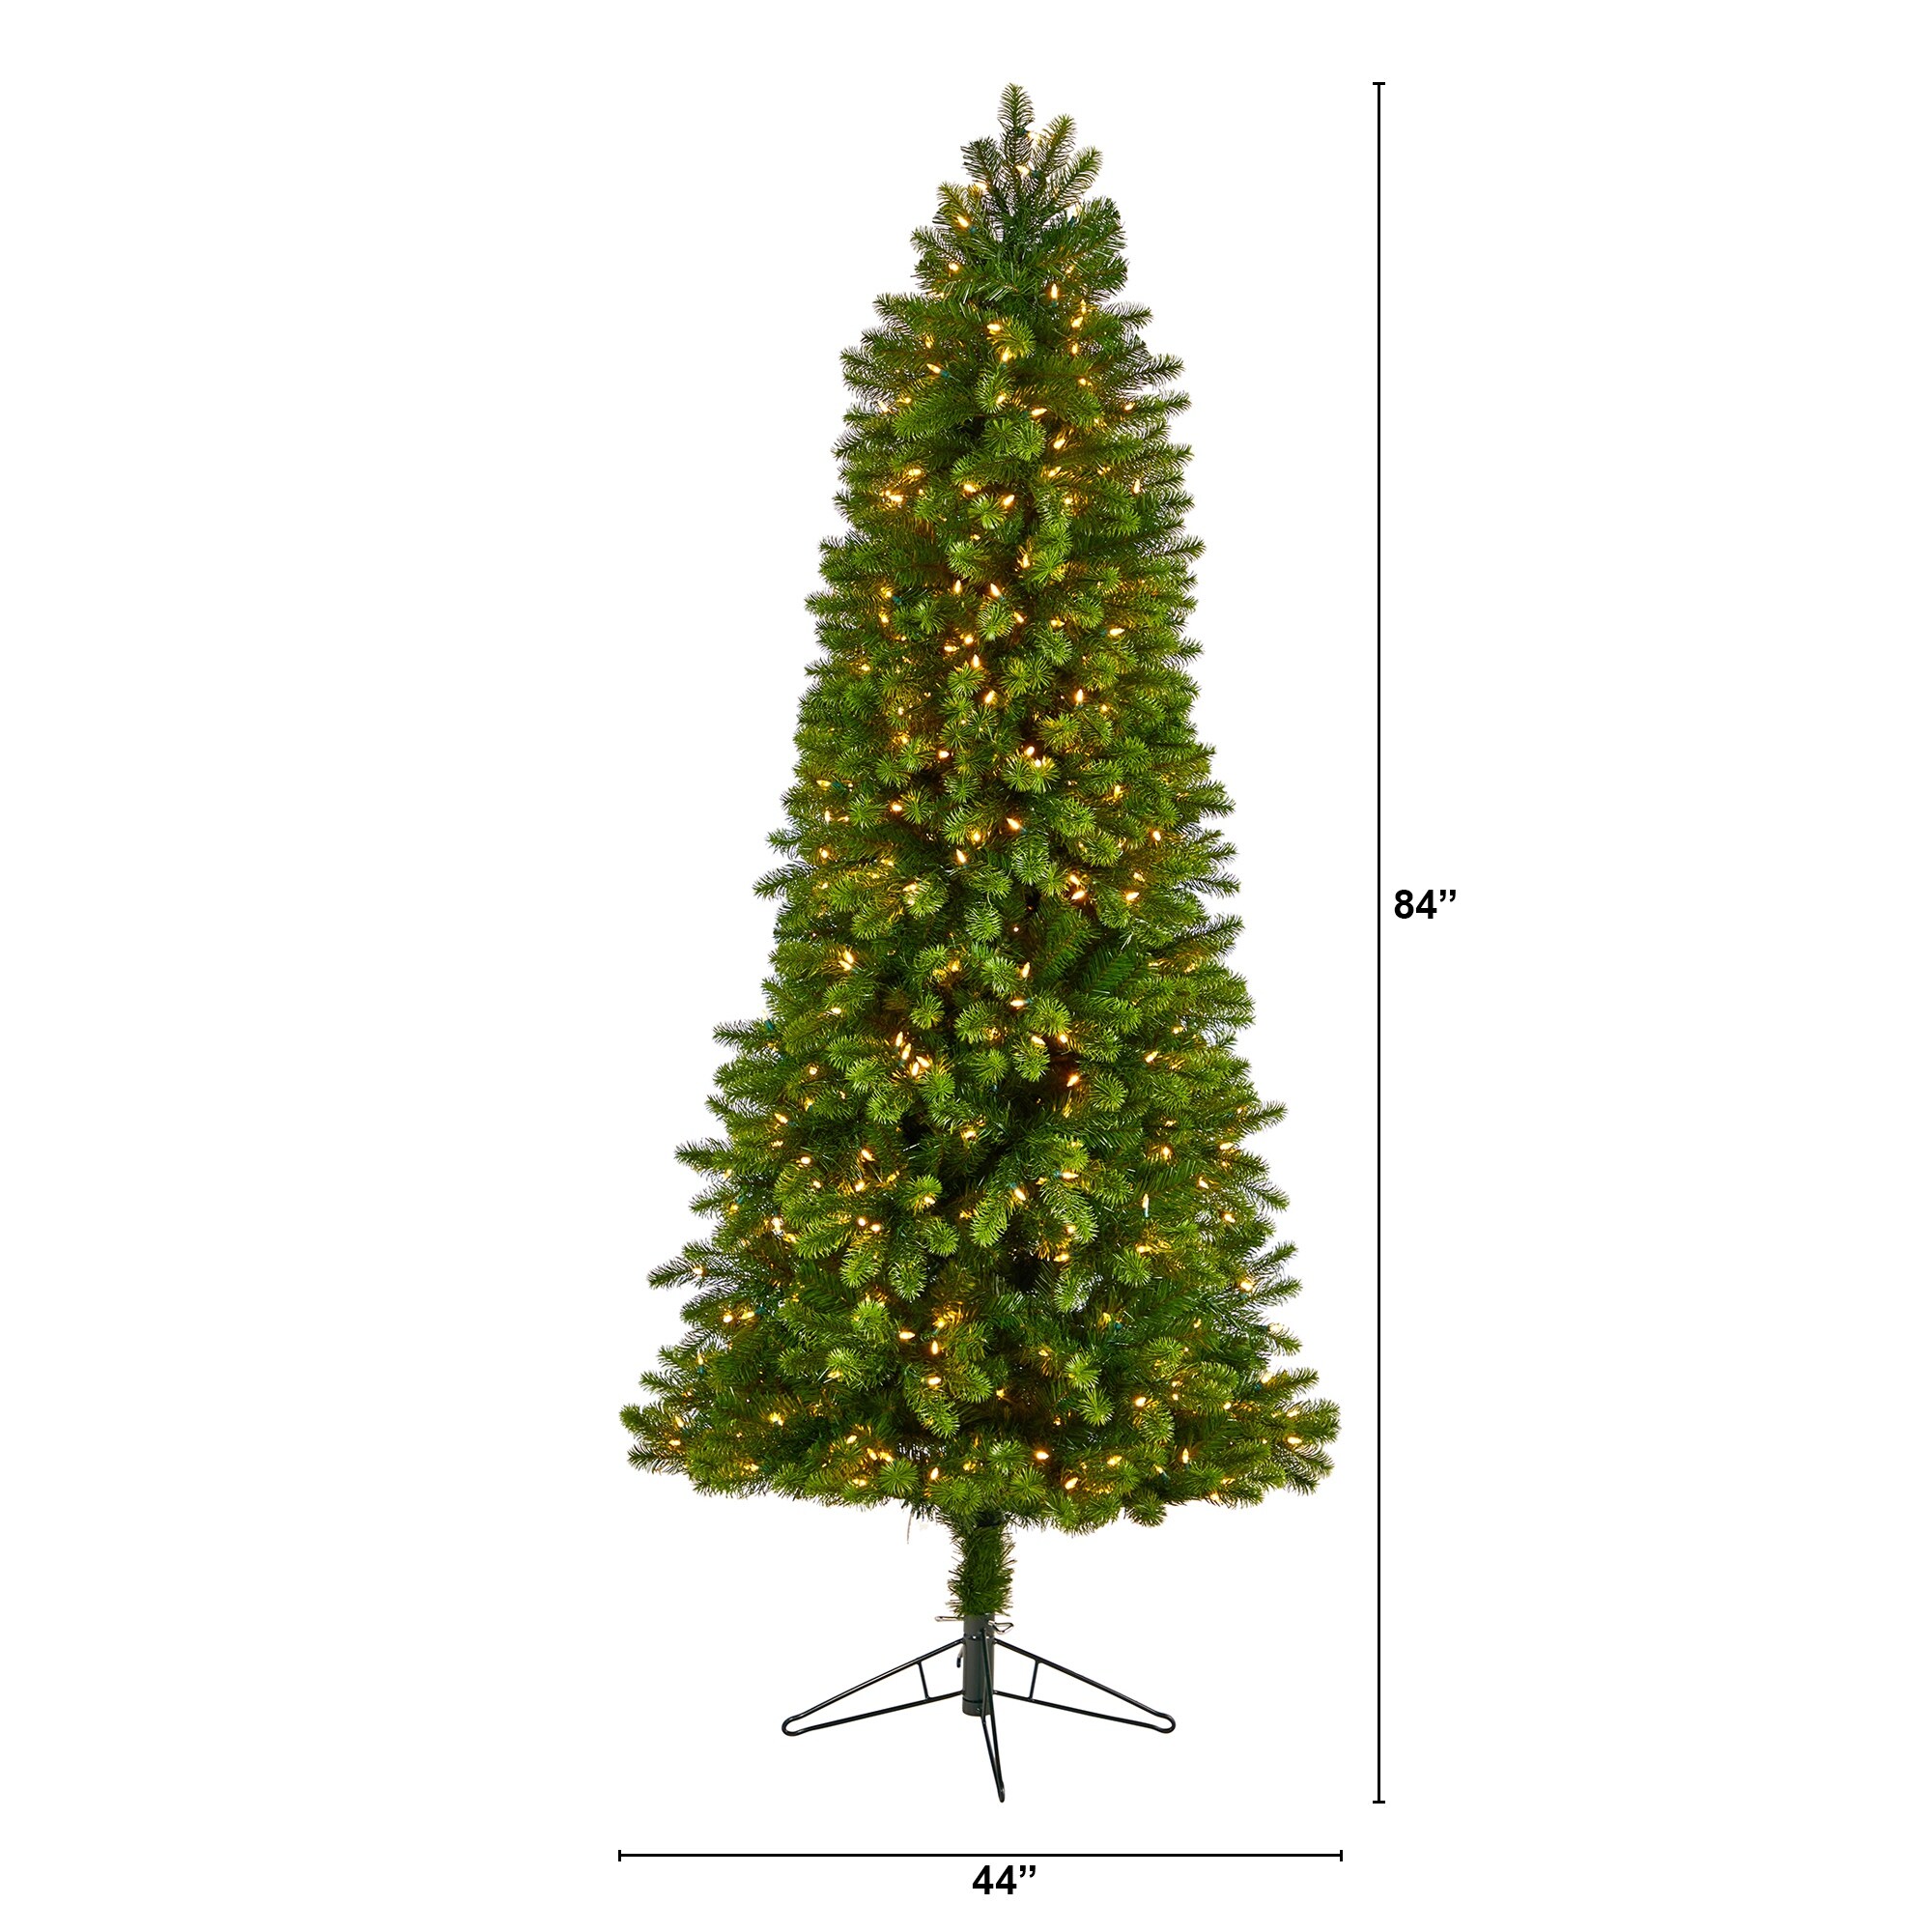 https://ak1.ostkcdn.com/images/products/is/images/direct/0abed0ff63eae1c5ea60fe725e52b39dc3761002/7%27-Slim-Virginia-Spruce-Artificial-Christmas-Tree-with-500-Warm-White-%28Multifunction%29-LED-Lights.jpg